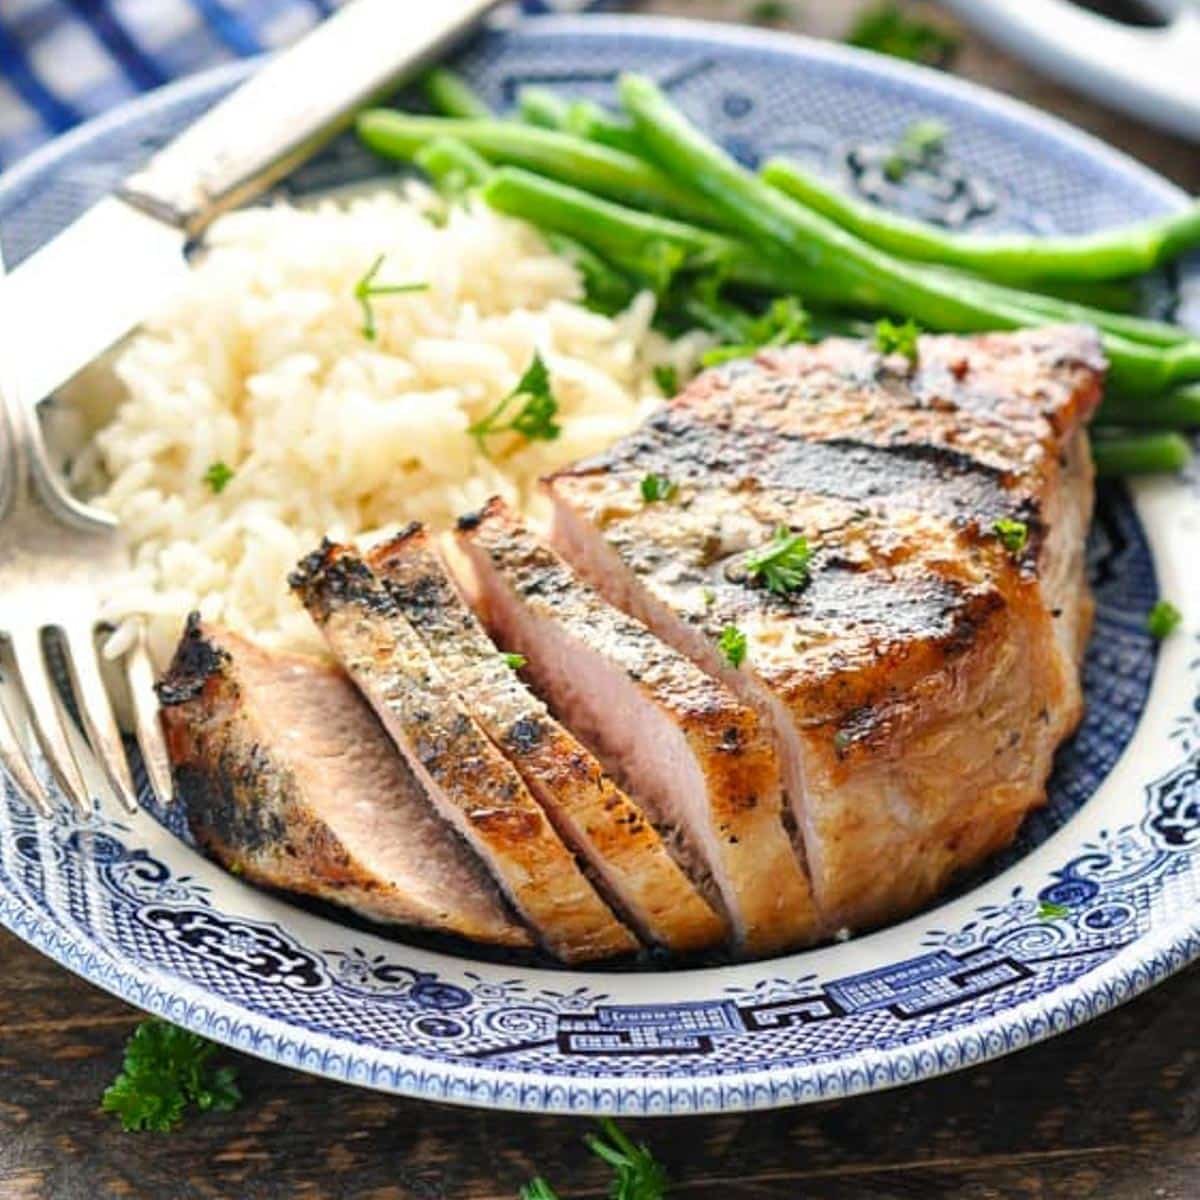 The Best Pork Chop Seasoning. Homemade and Flavorful - Hey Grill, Hey